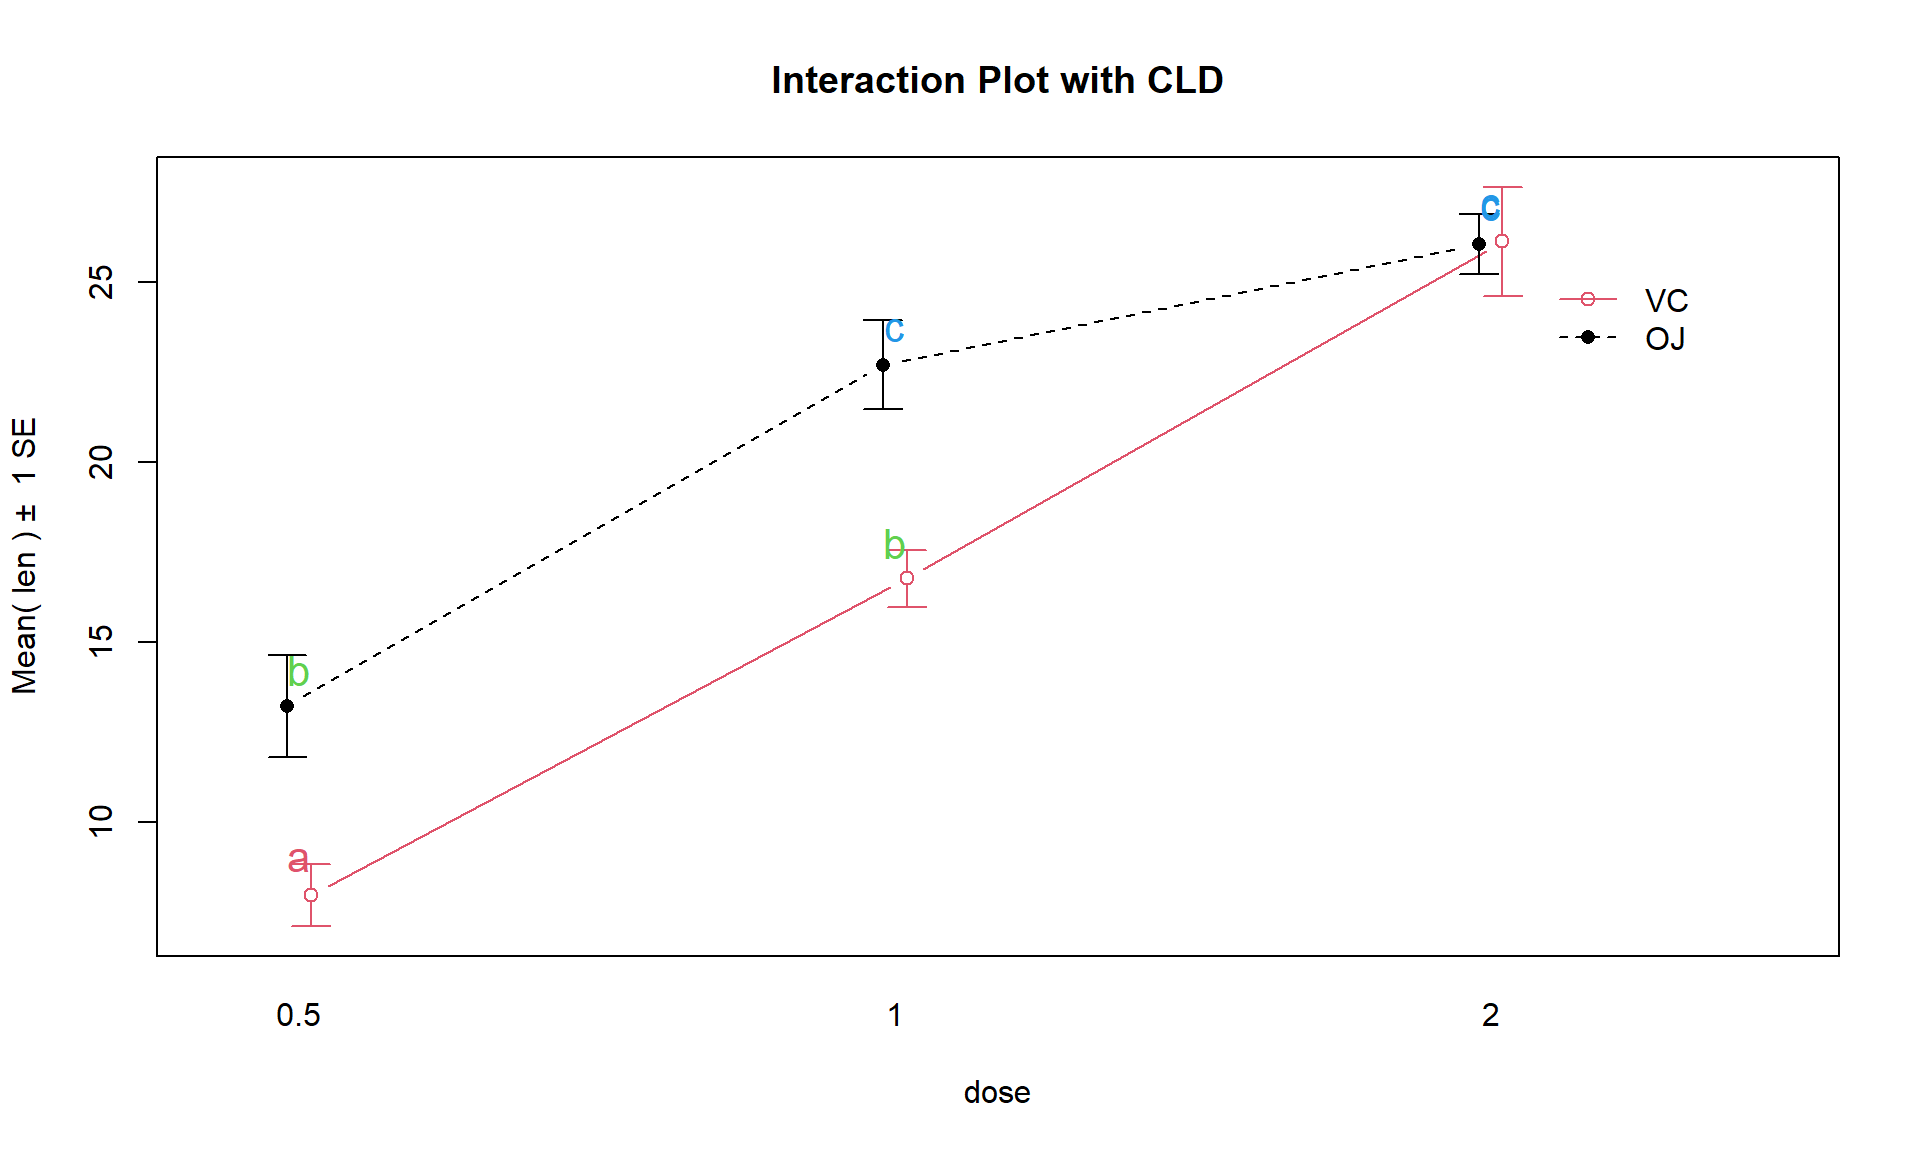 Interaction plot for Odontoblast data with added CLD from Tukey’s HSD.